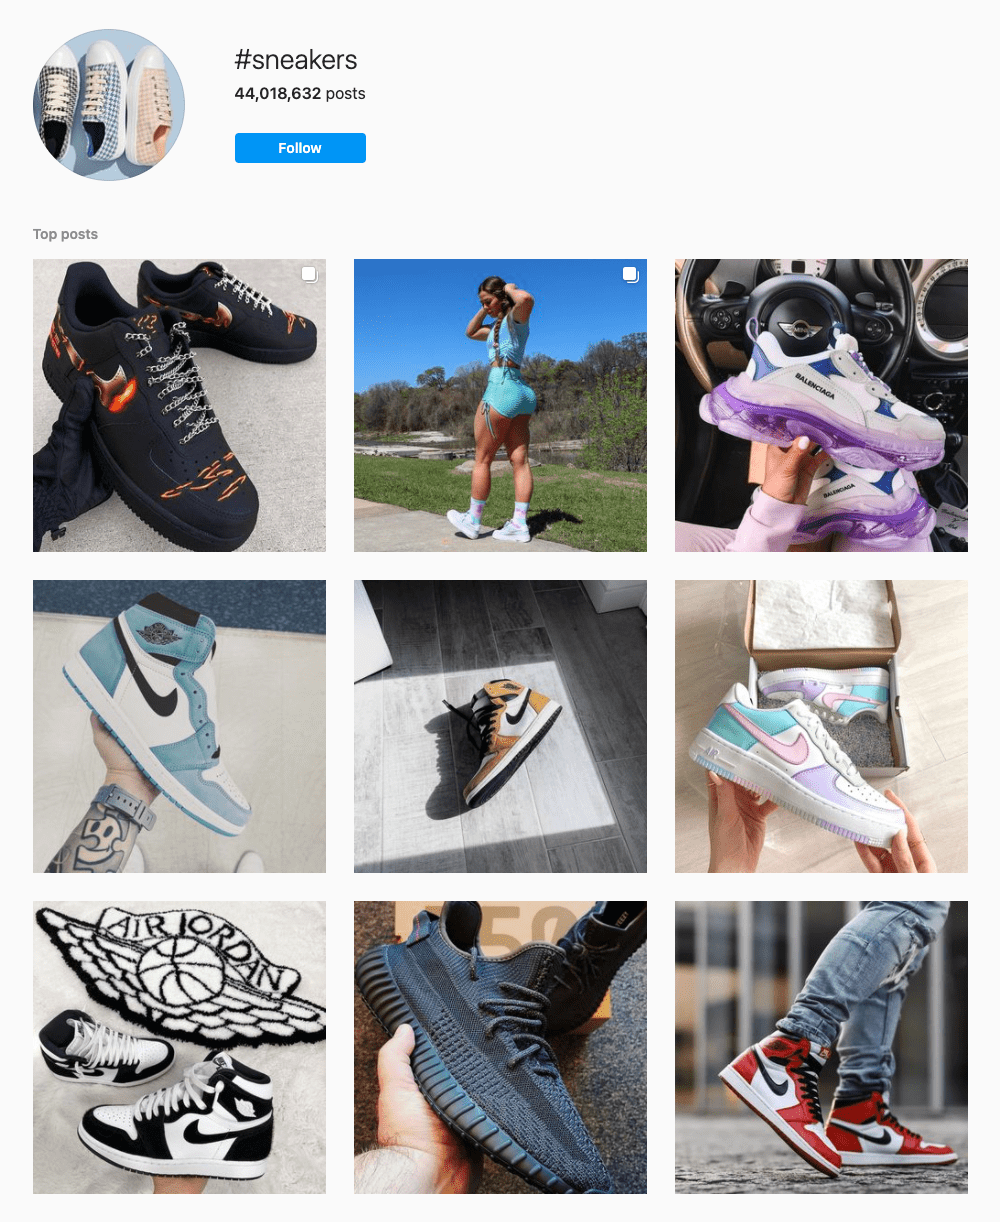 #sneakers Hashtags for Instagram